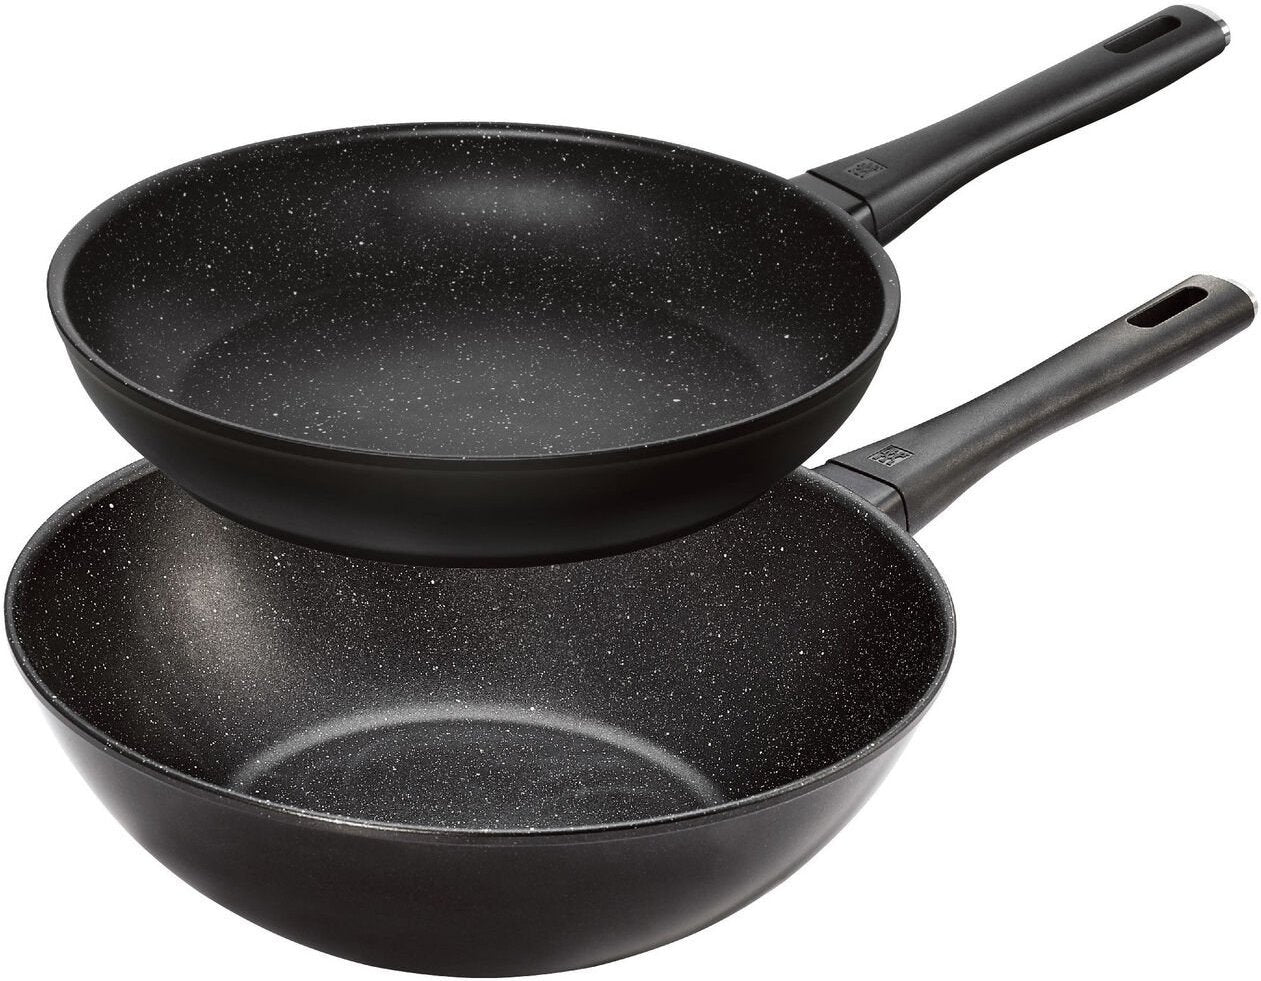 Zwilling - Marquina 2 PC Aluminum Wok With Fry Pan - 66309-004